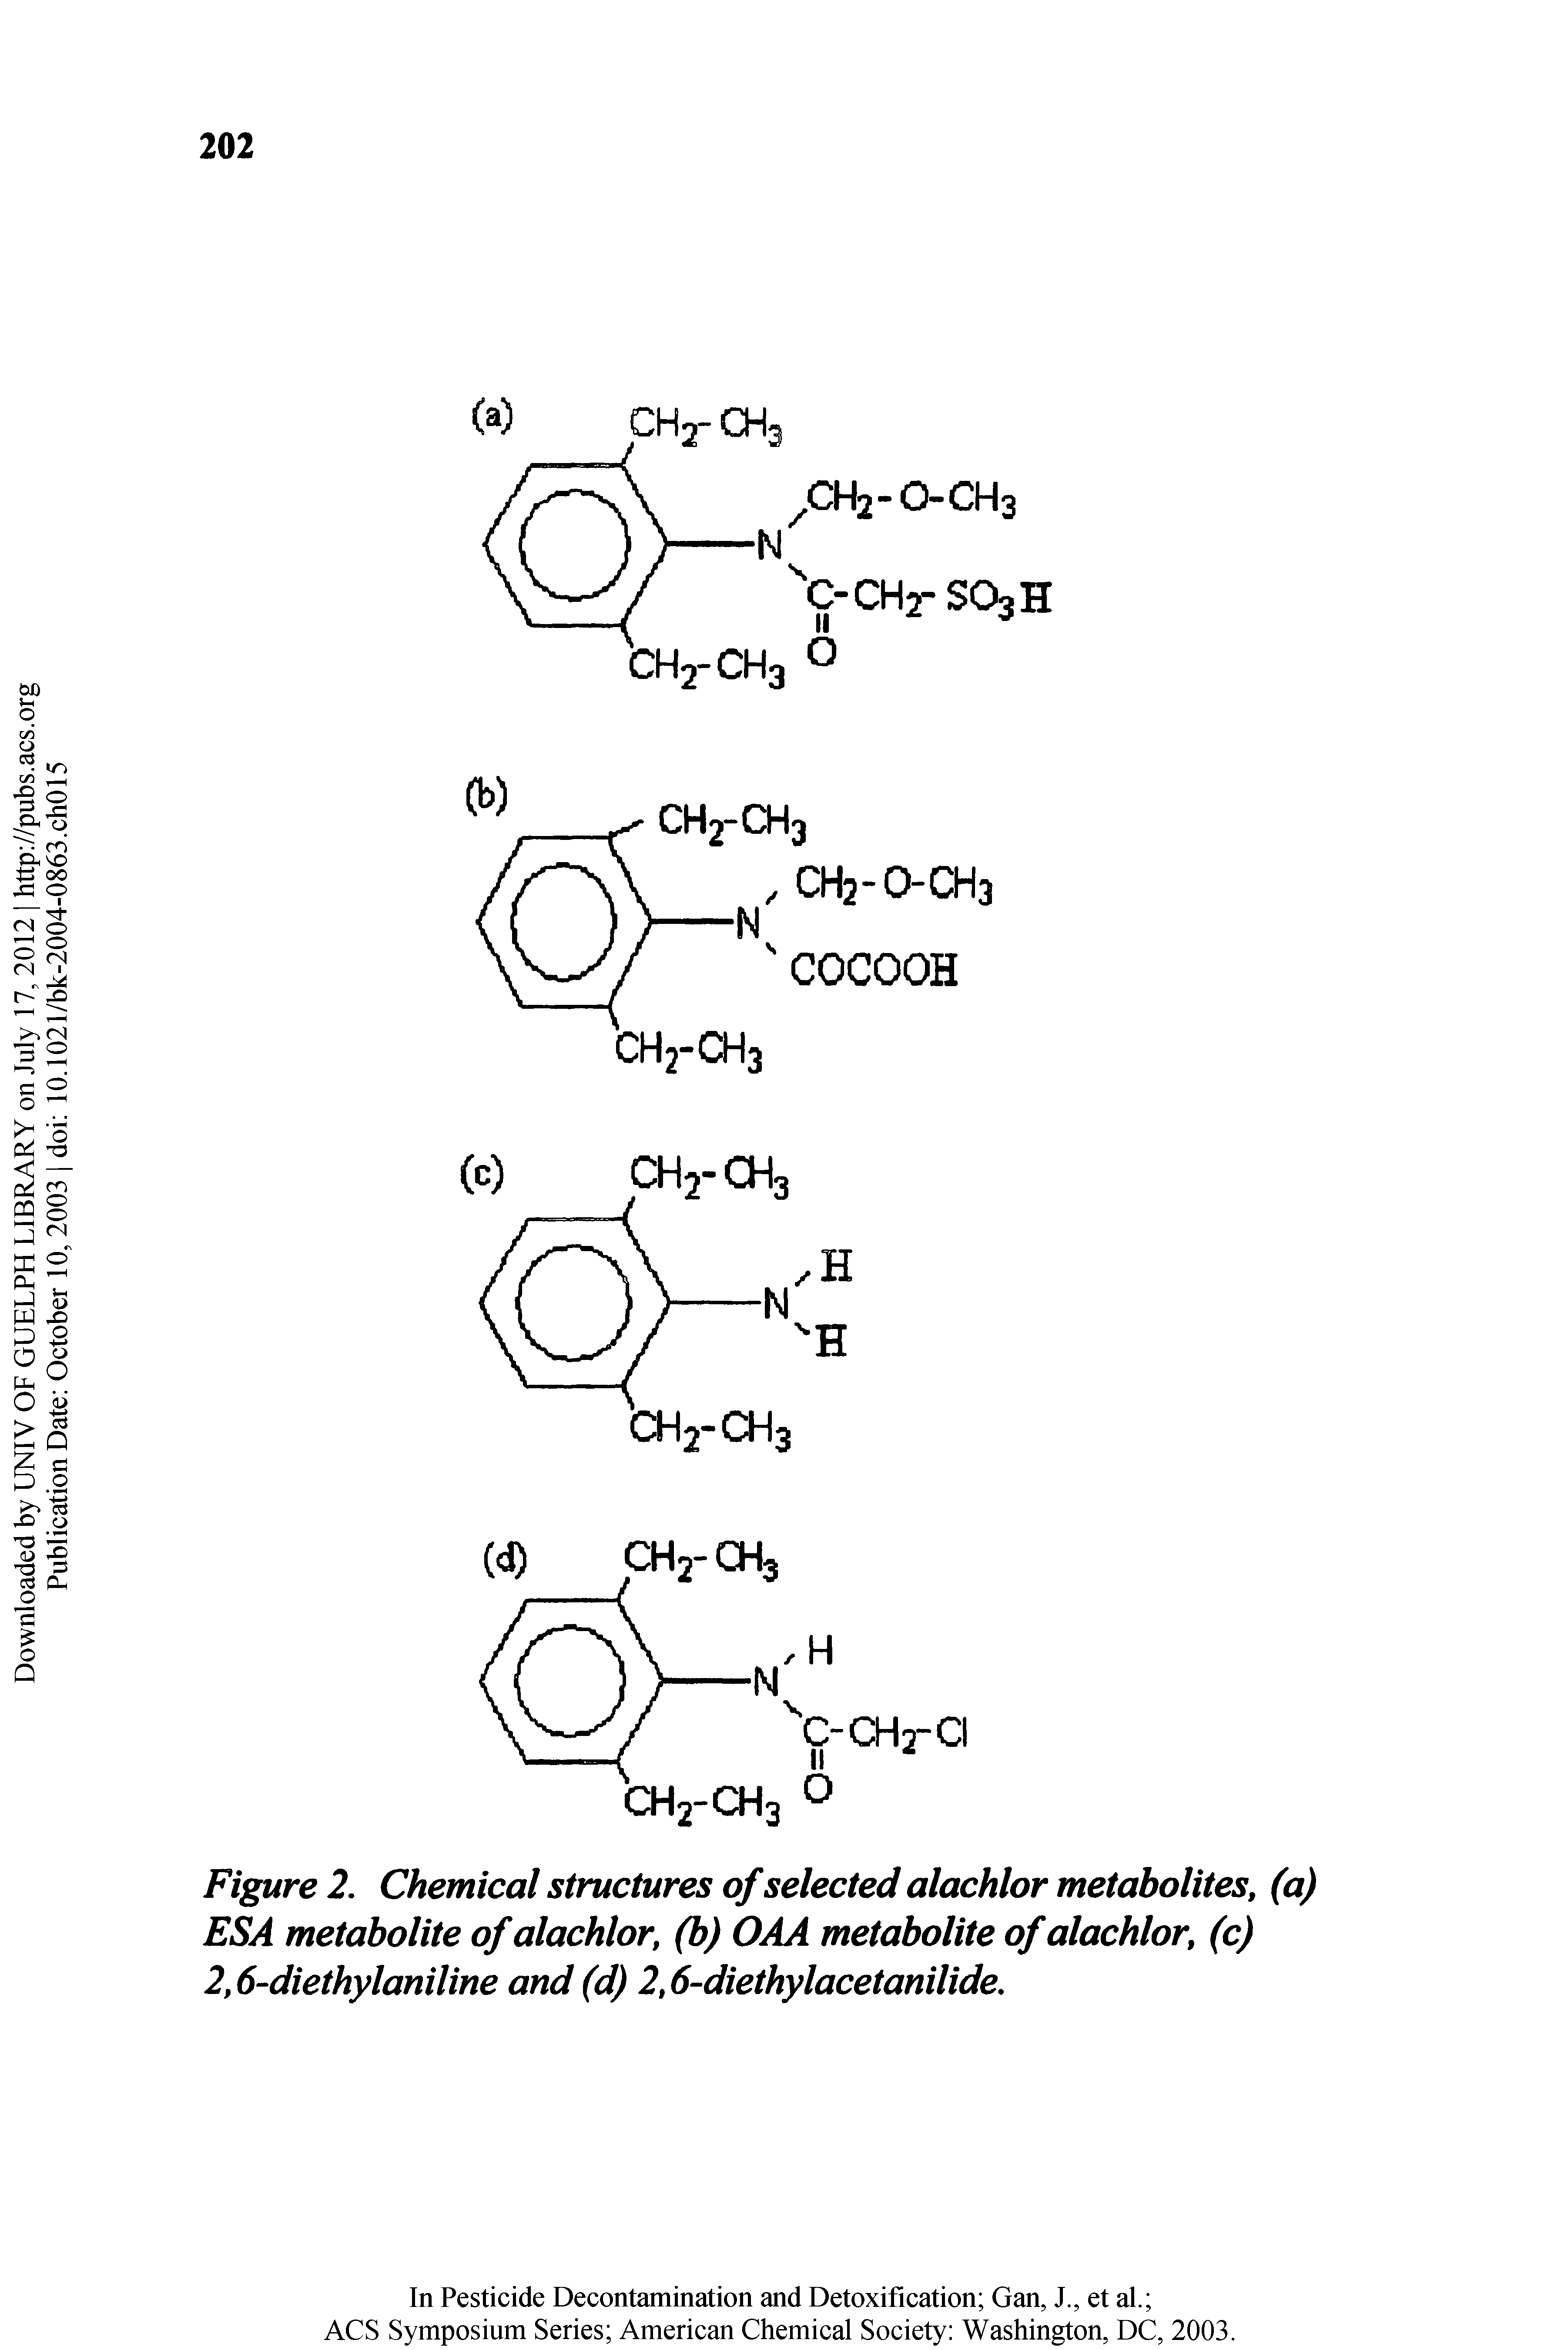 Figure 2. Chemical structures of selected alachlor metabolites, (a) ESA metabolite of alachlor, (b) OAA metabolite of alachlor, (c) 2,6-diethylaniline and (d) 2,6-diethylacetanilide.